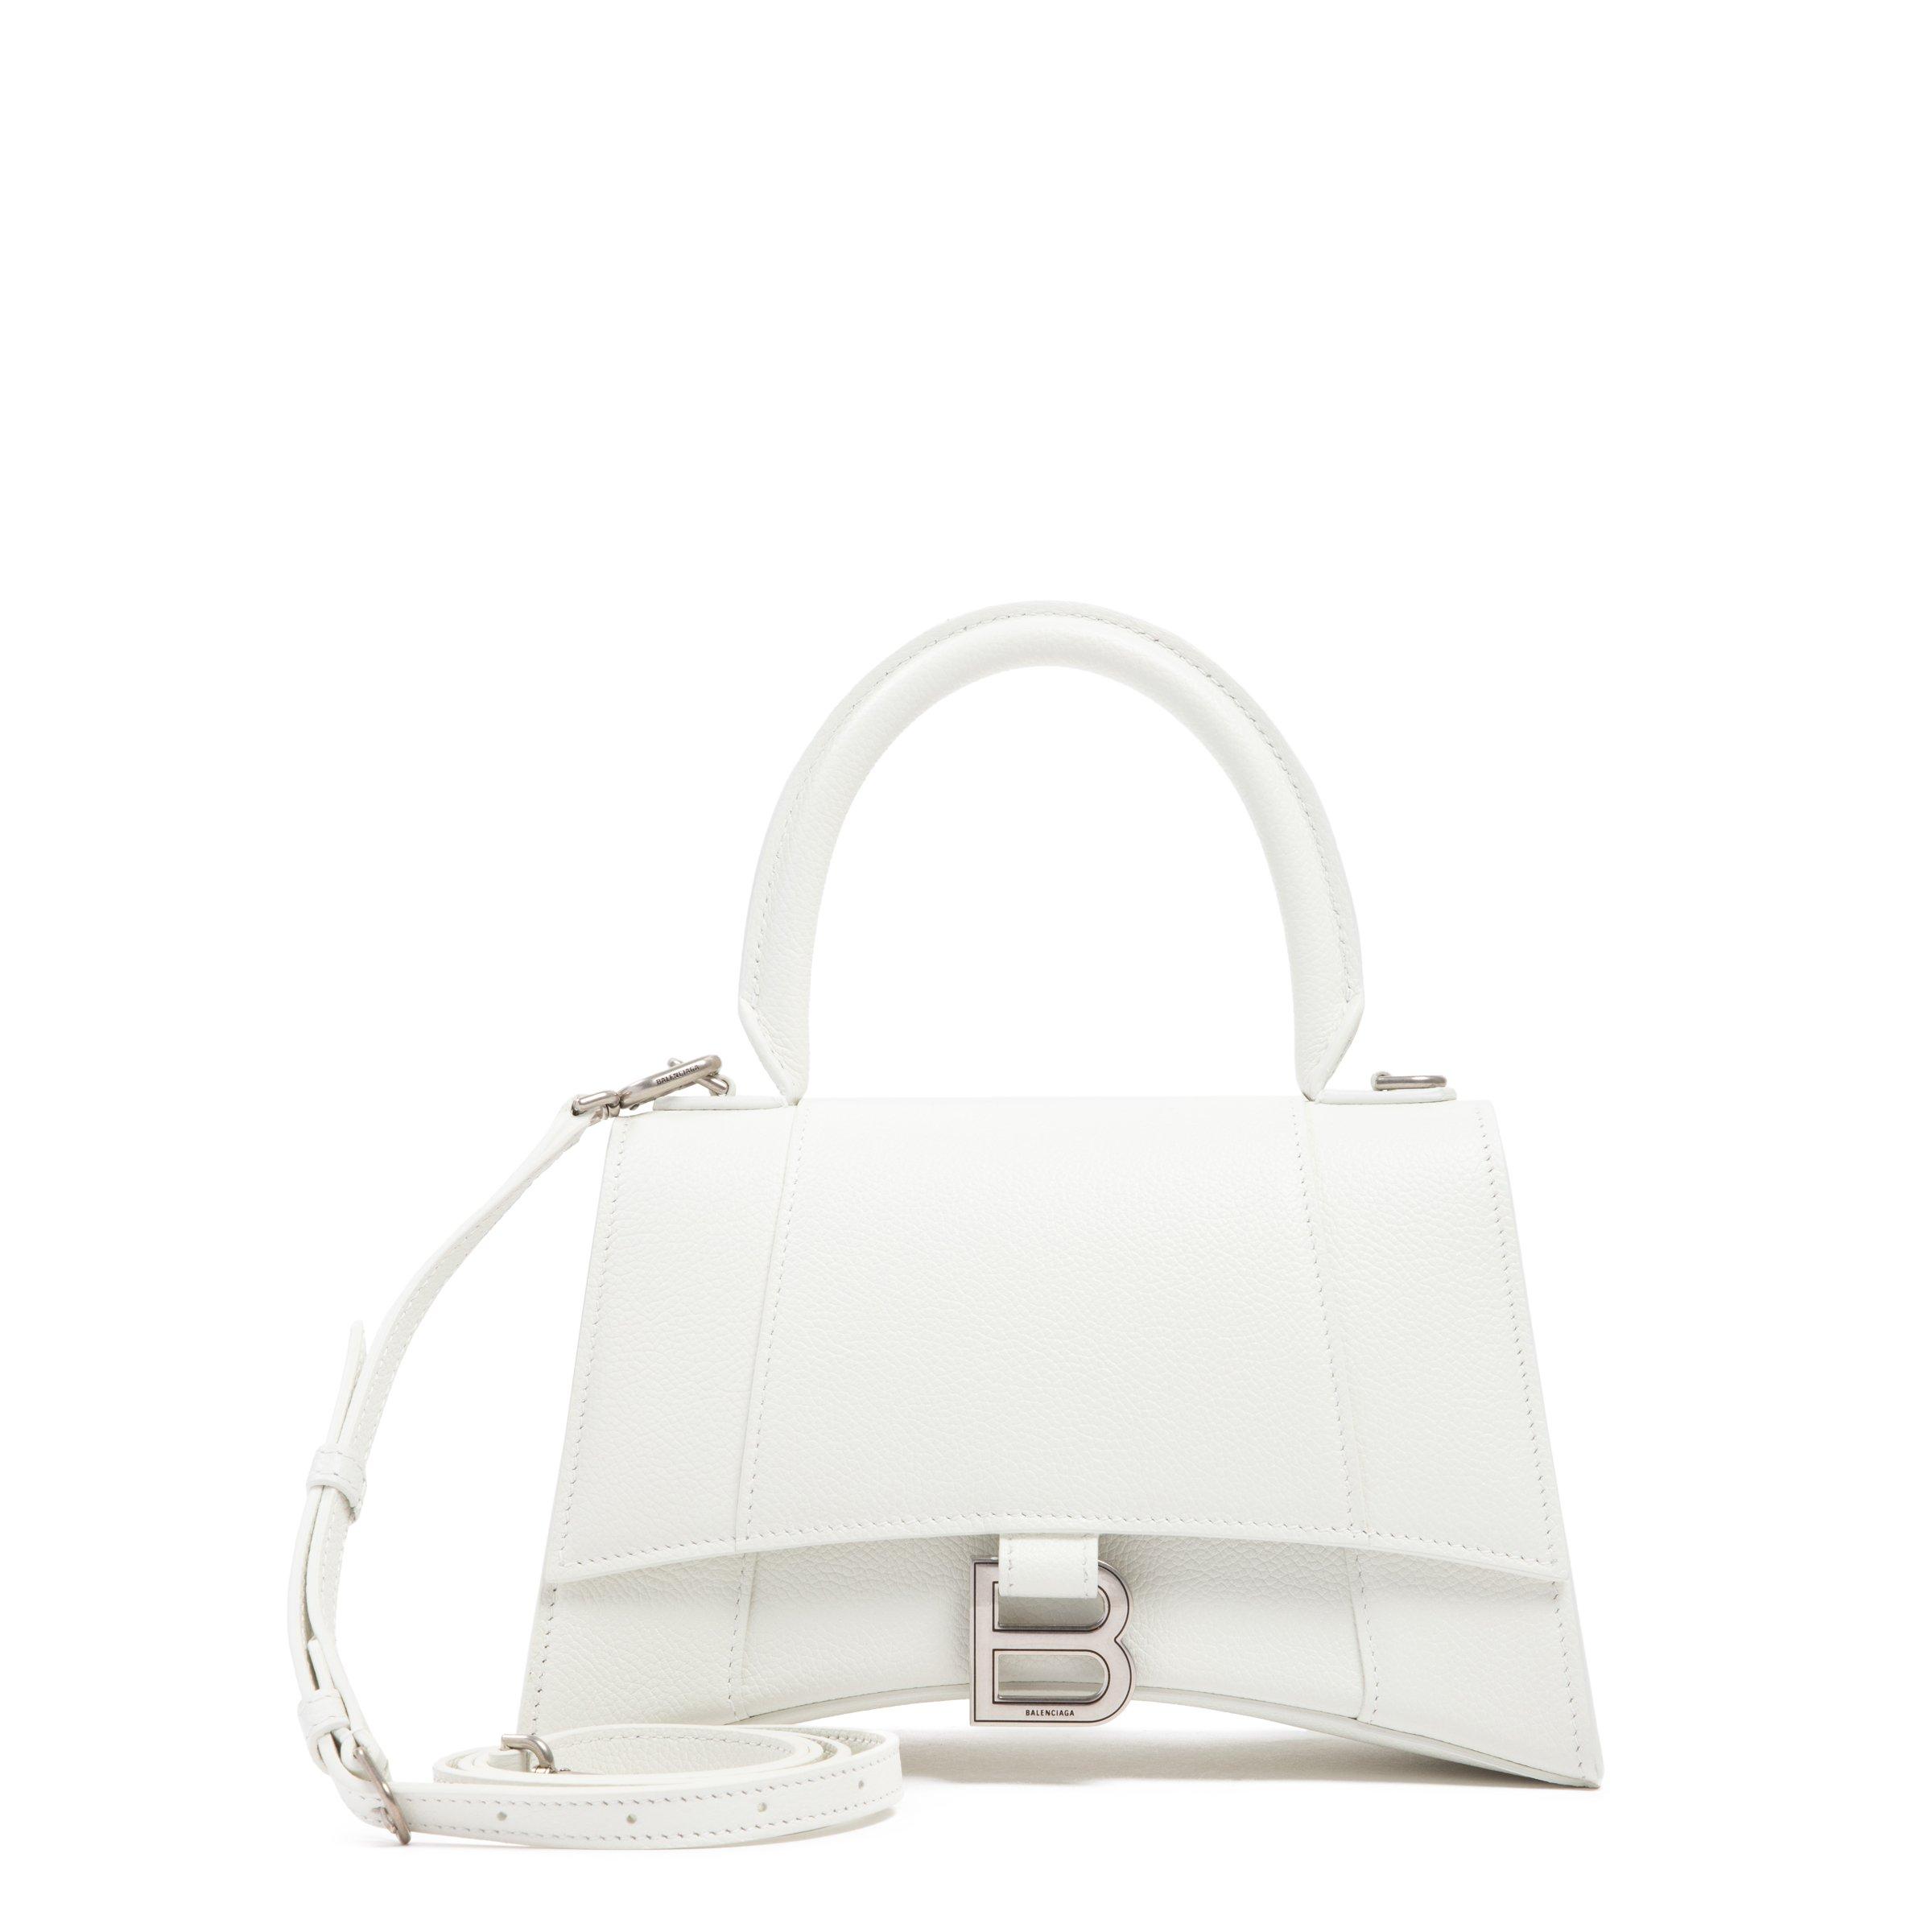 Balenciaga Leather Hourglass Small Top Handle Bag in White - Lyst